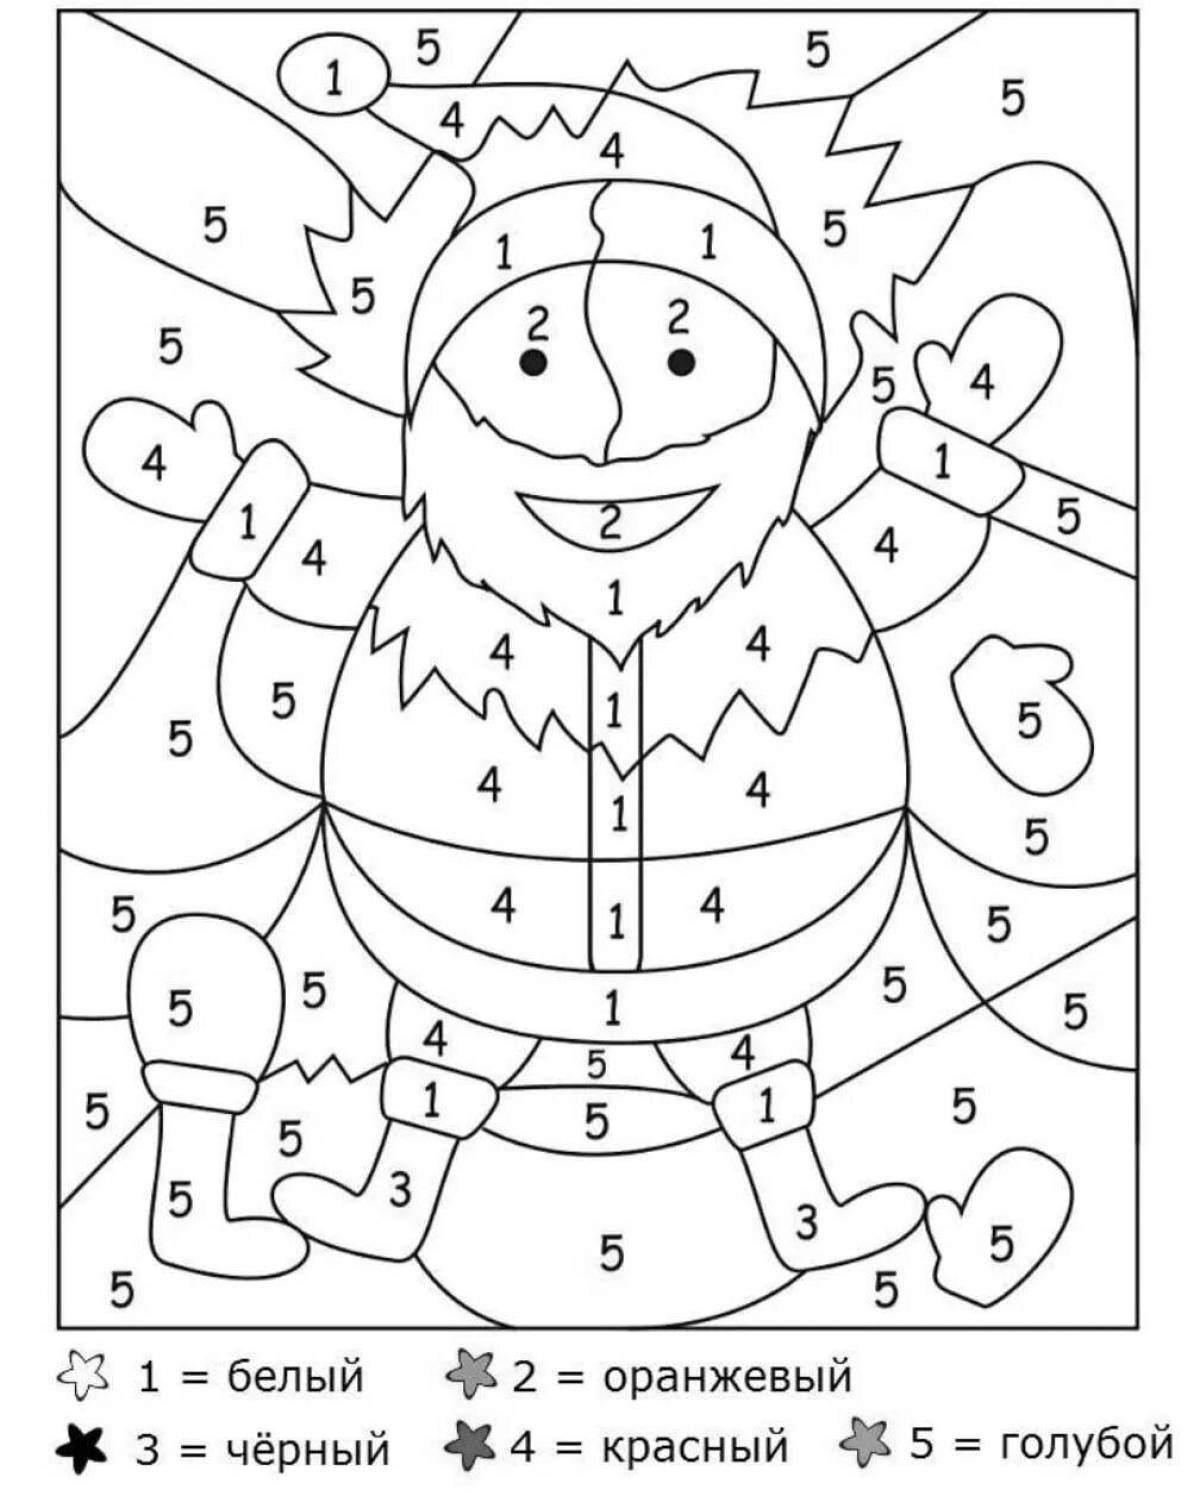 Fascinating santa claus coloring by numbers